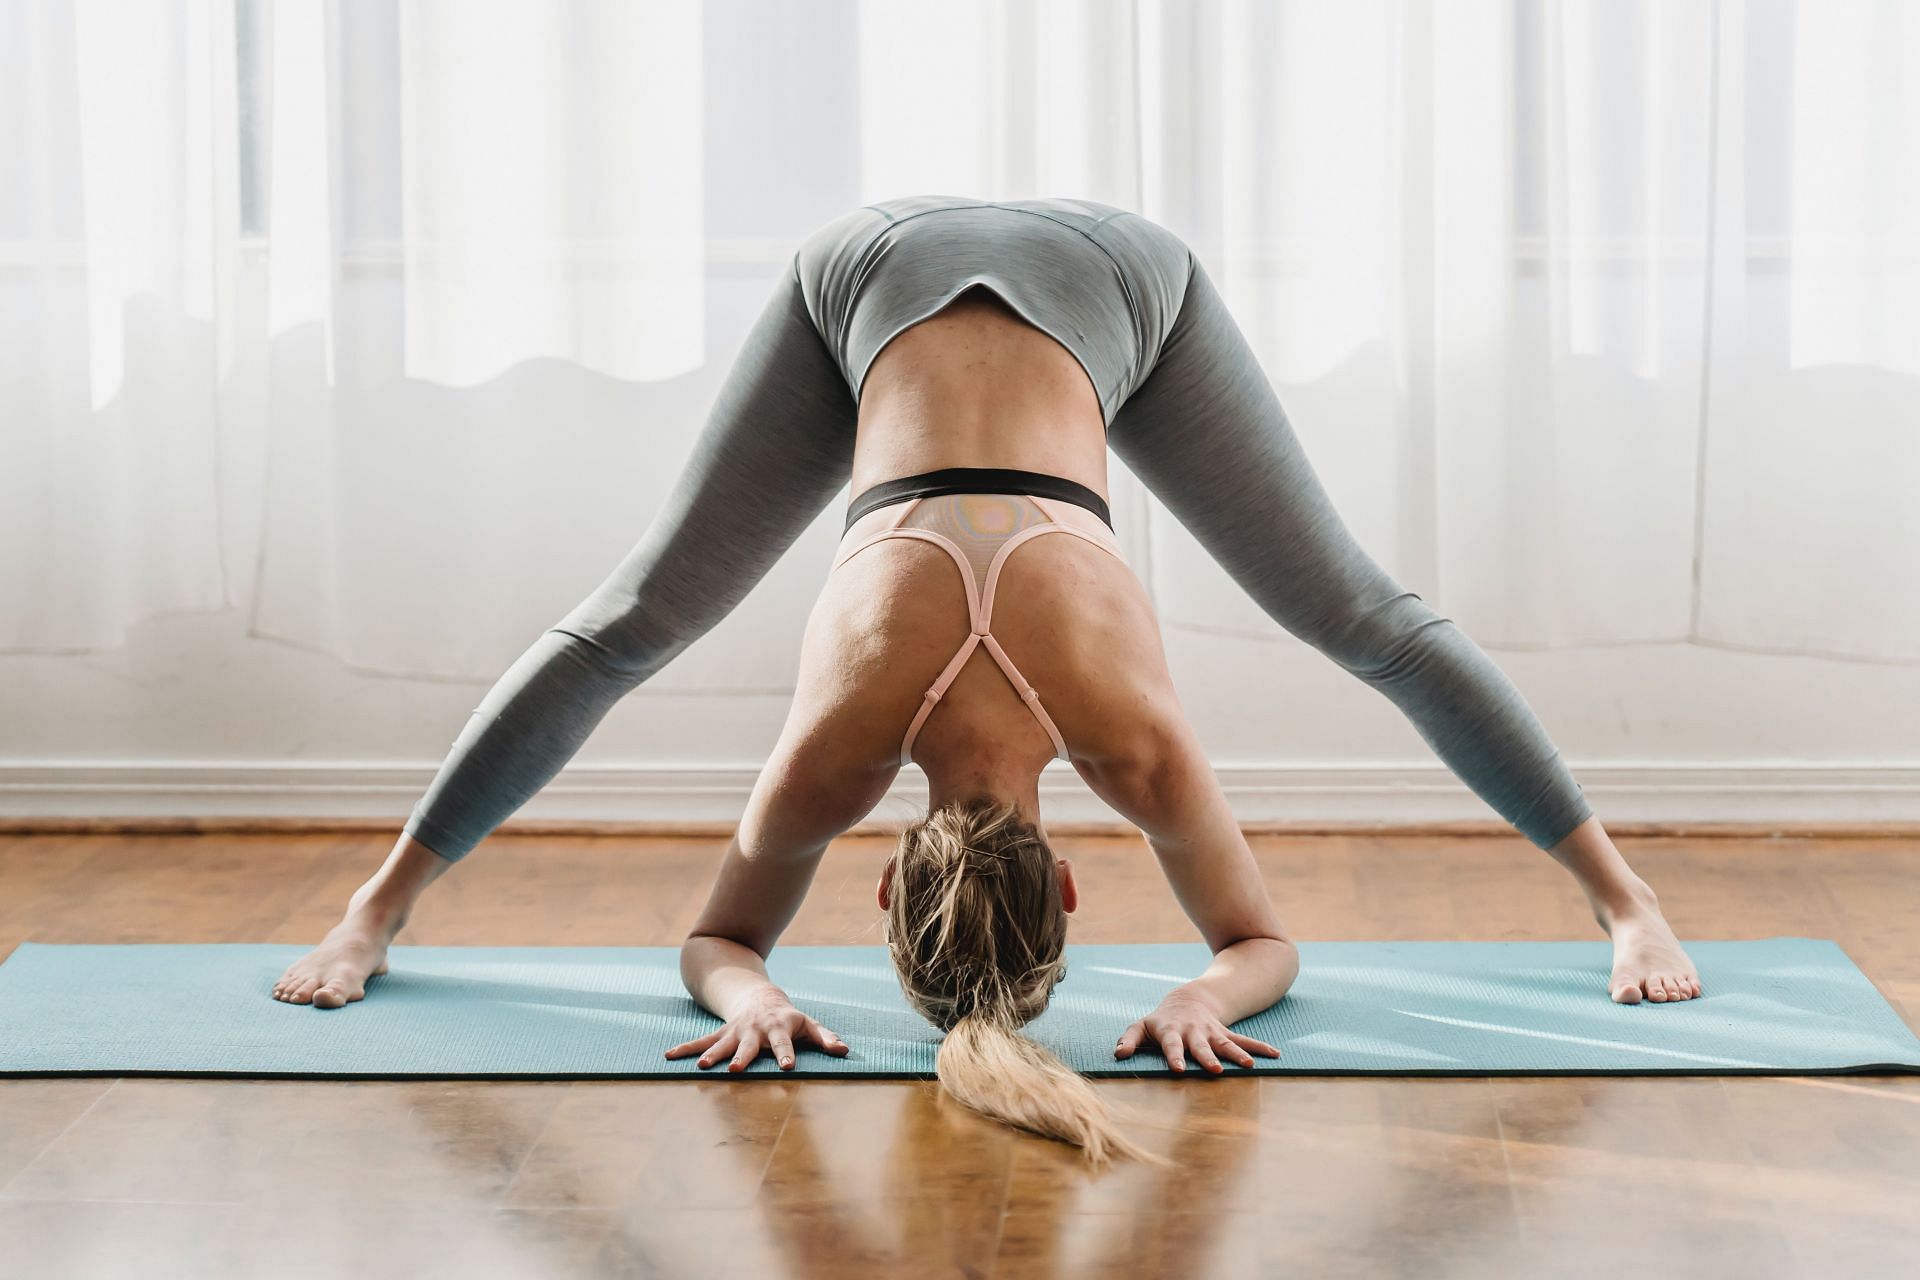 Power Yoga: A 45-Minute Session to Strengthen Body and Mind